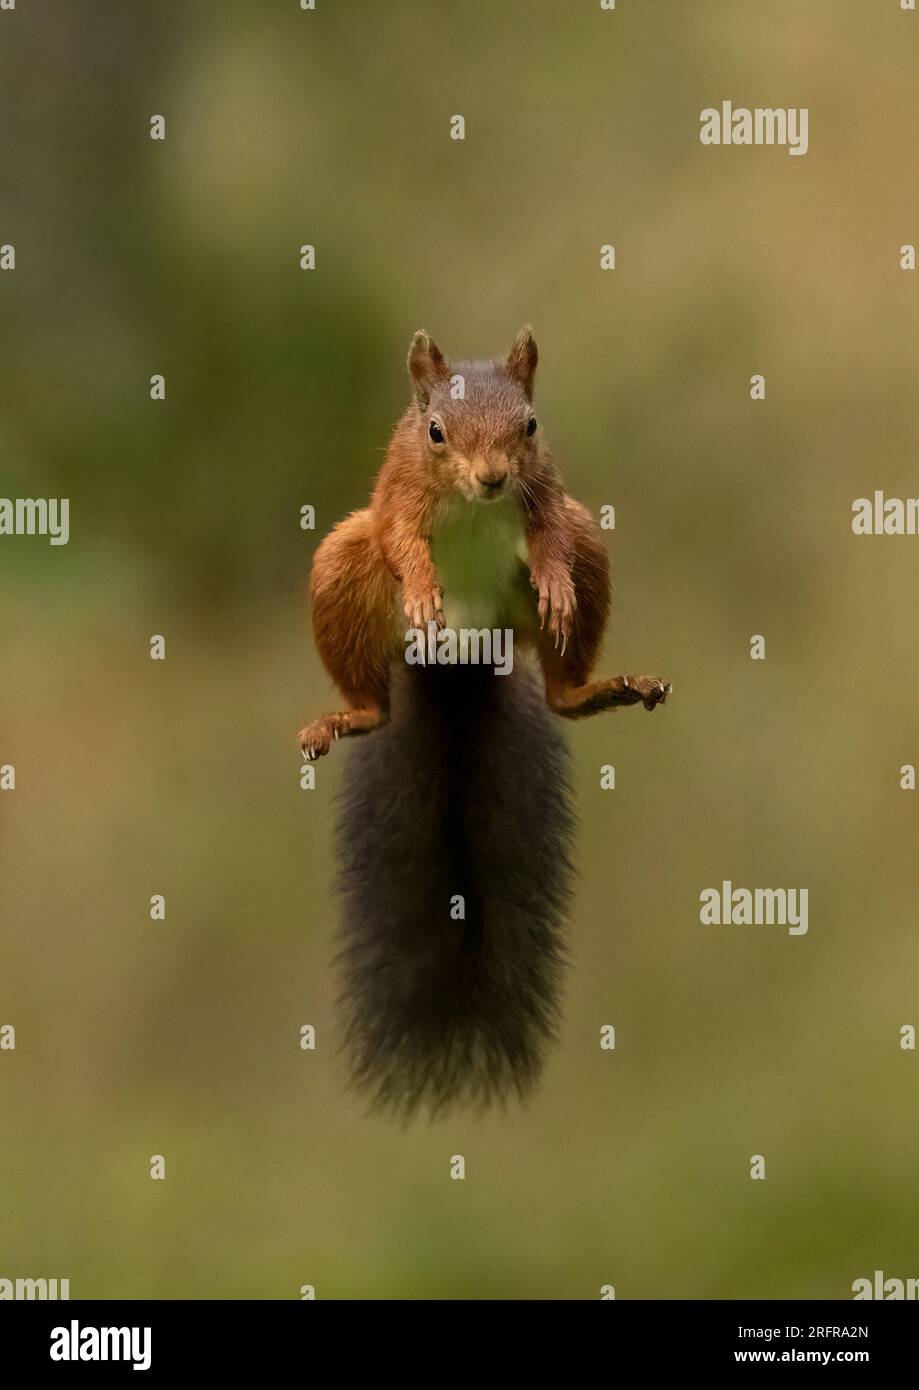 A unique shot of jumping Red Squirrel (Sciuris vulgaris), flying through the air with paws and bushy tail outstretched. Clear background Yorkshire, UK Stock Photo